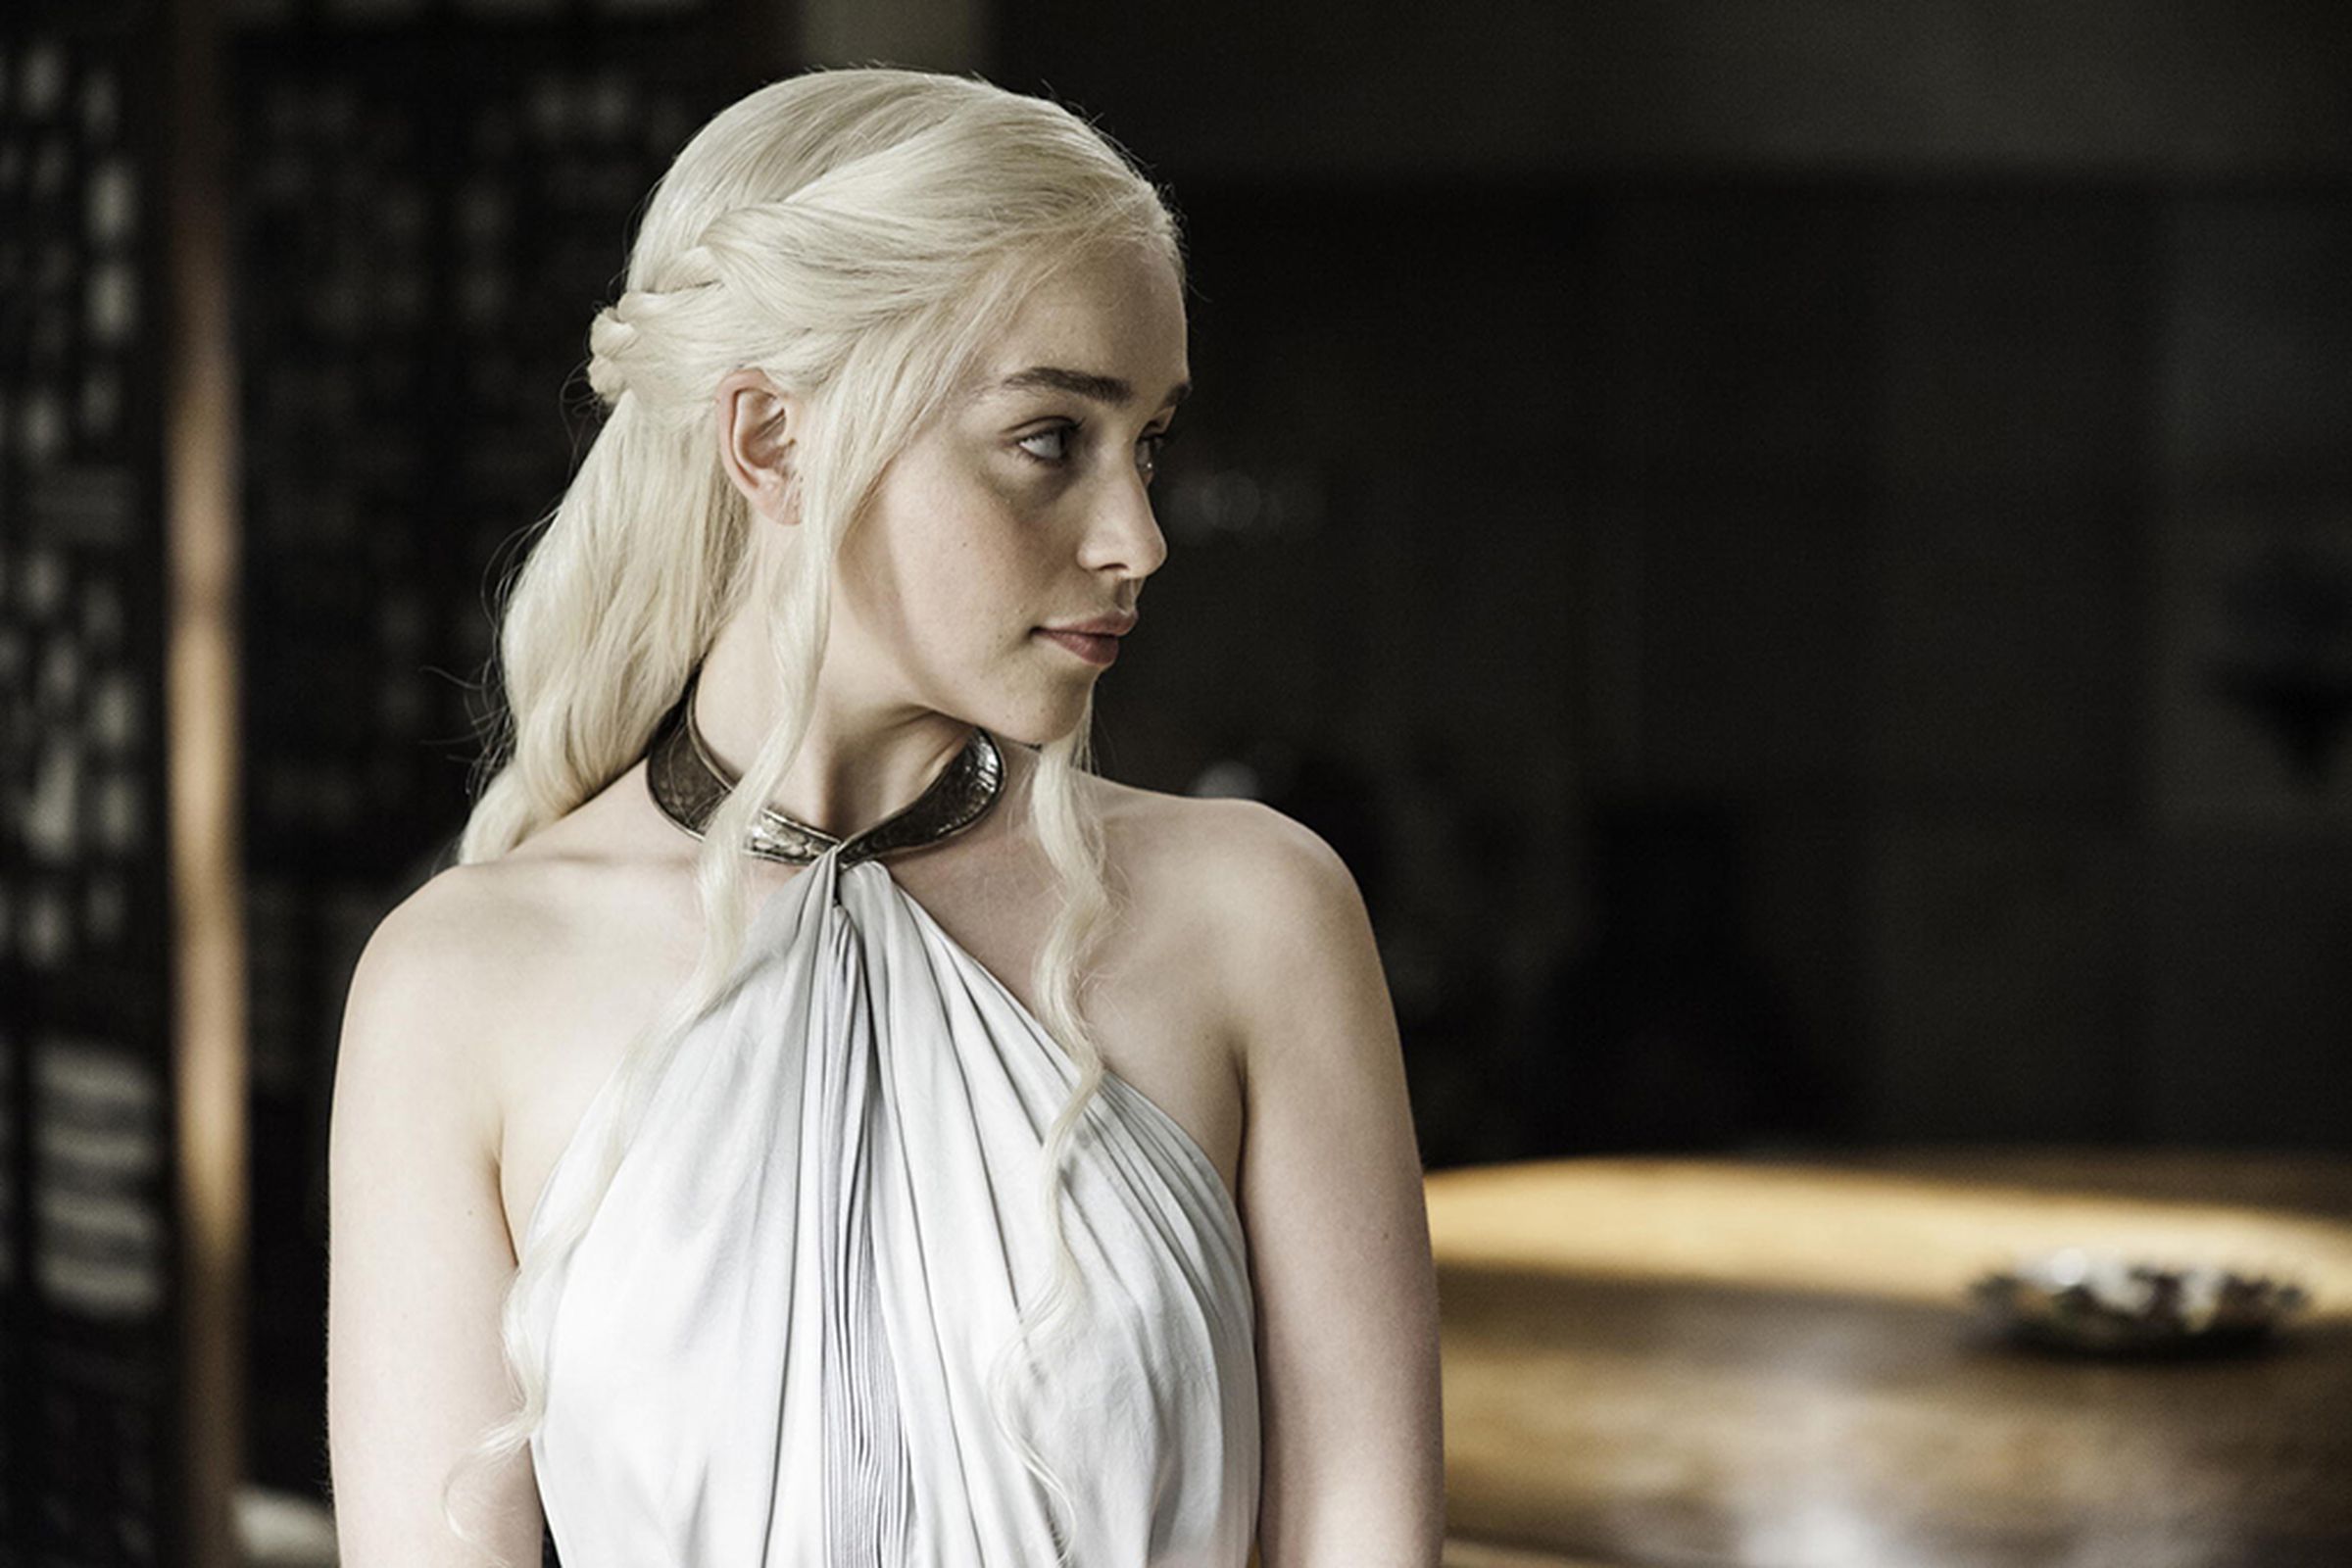 Game of Thrones Season 5 Episode 5 promotional still (HBO)